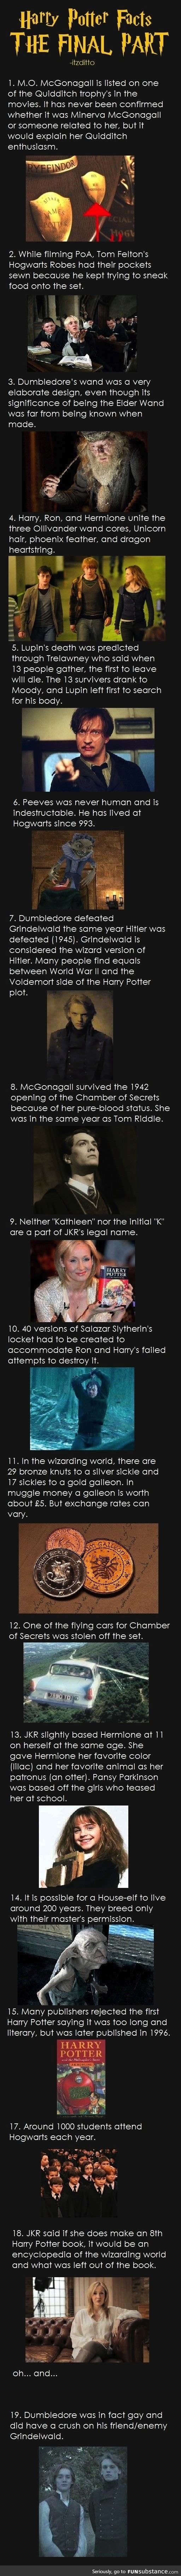 More harry potter facts